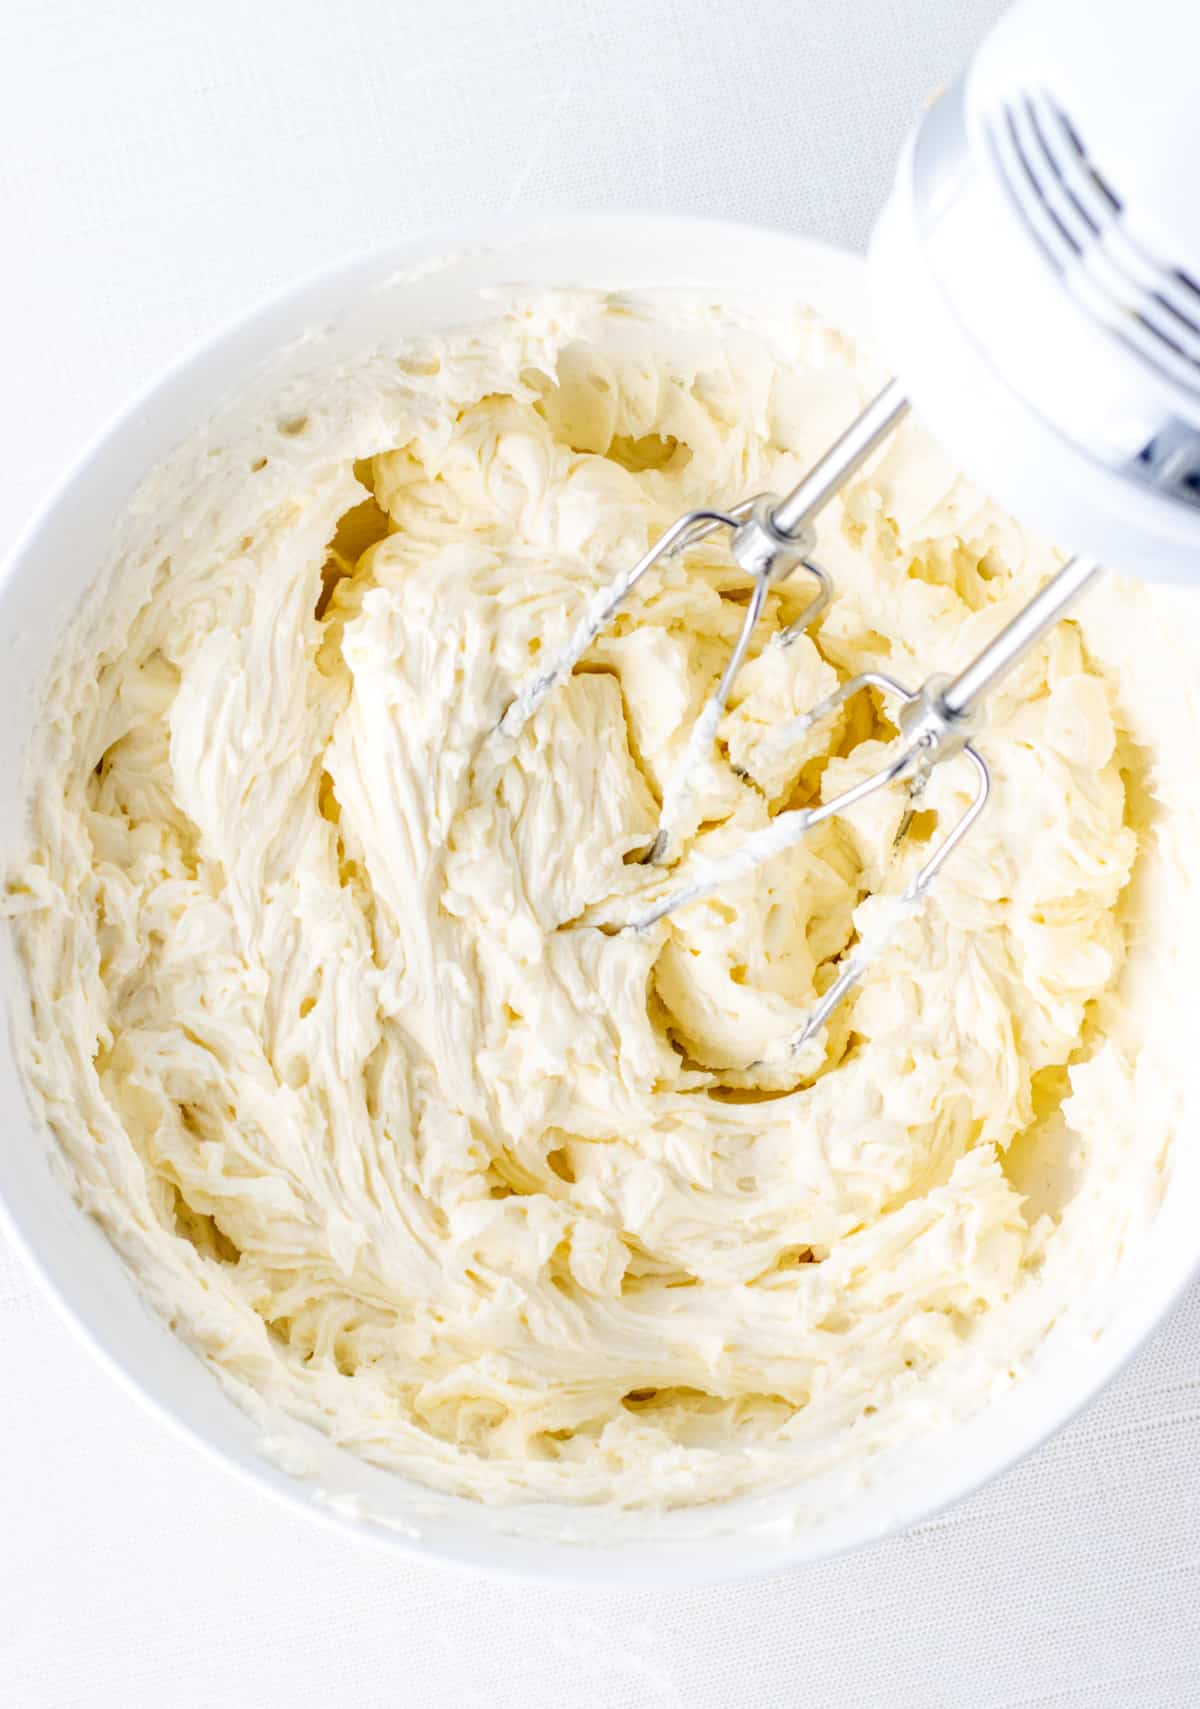 Mascarpone frosting in a bowl with and electric whisk on the side.